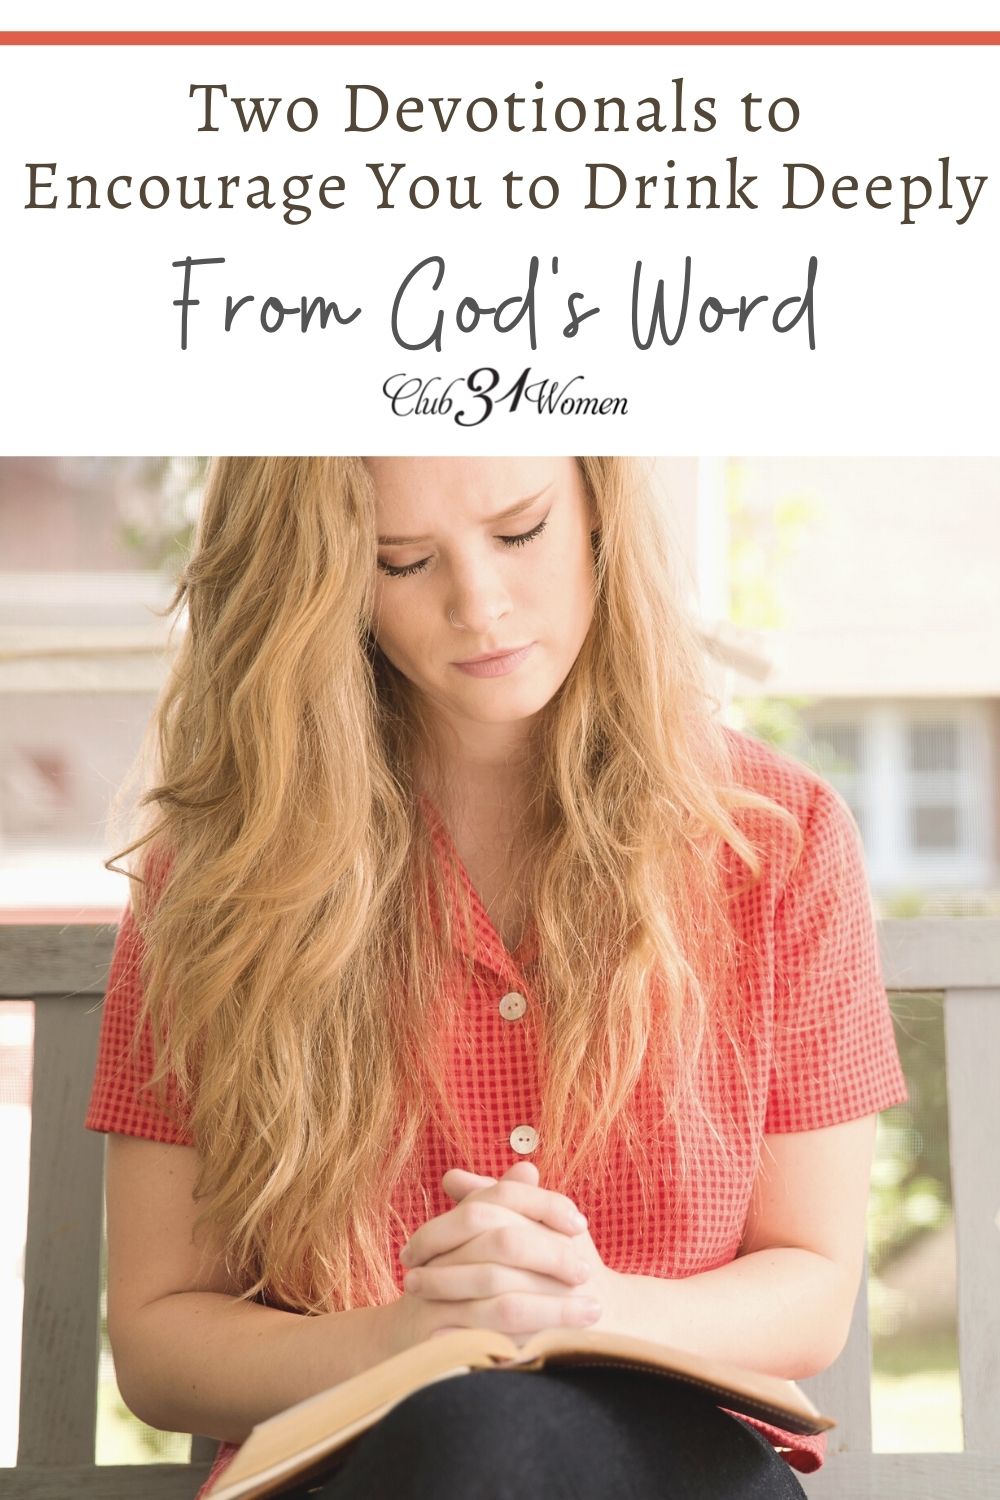 Sometimes life throws us off course and it can be difficult to find our way back. How can we once again drink deeply from God's Word? via @Club31Women